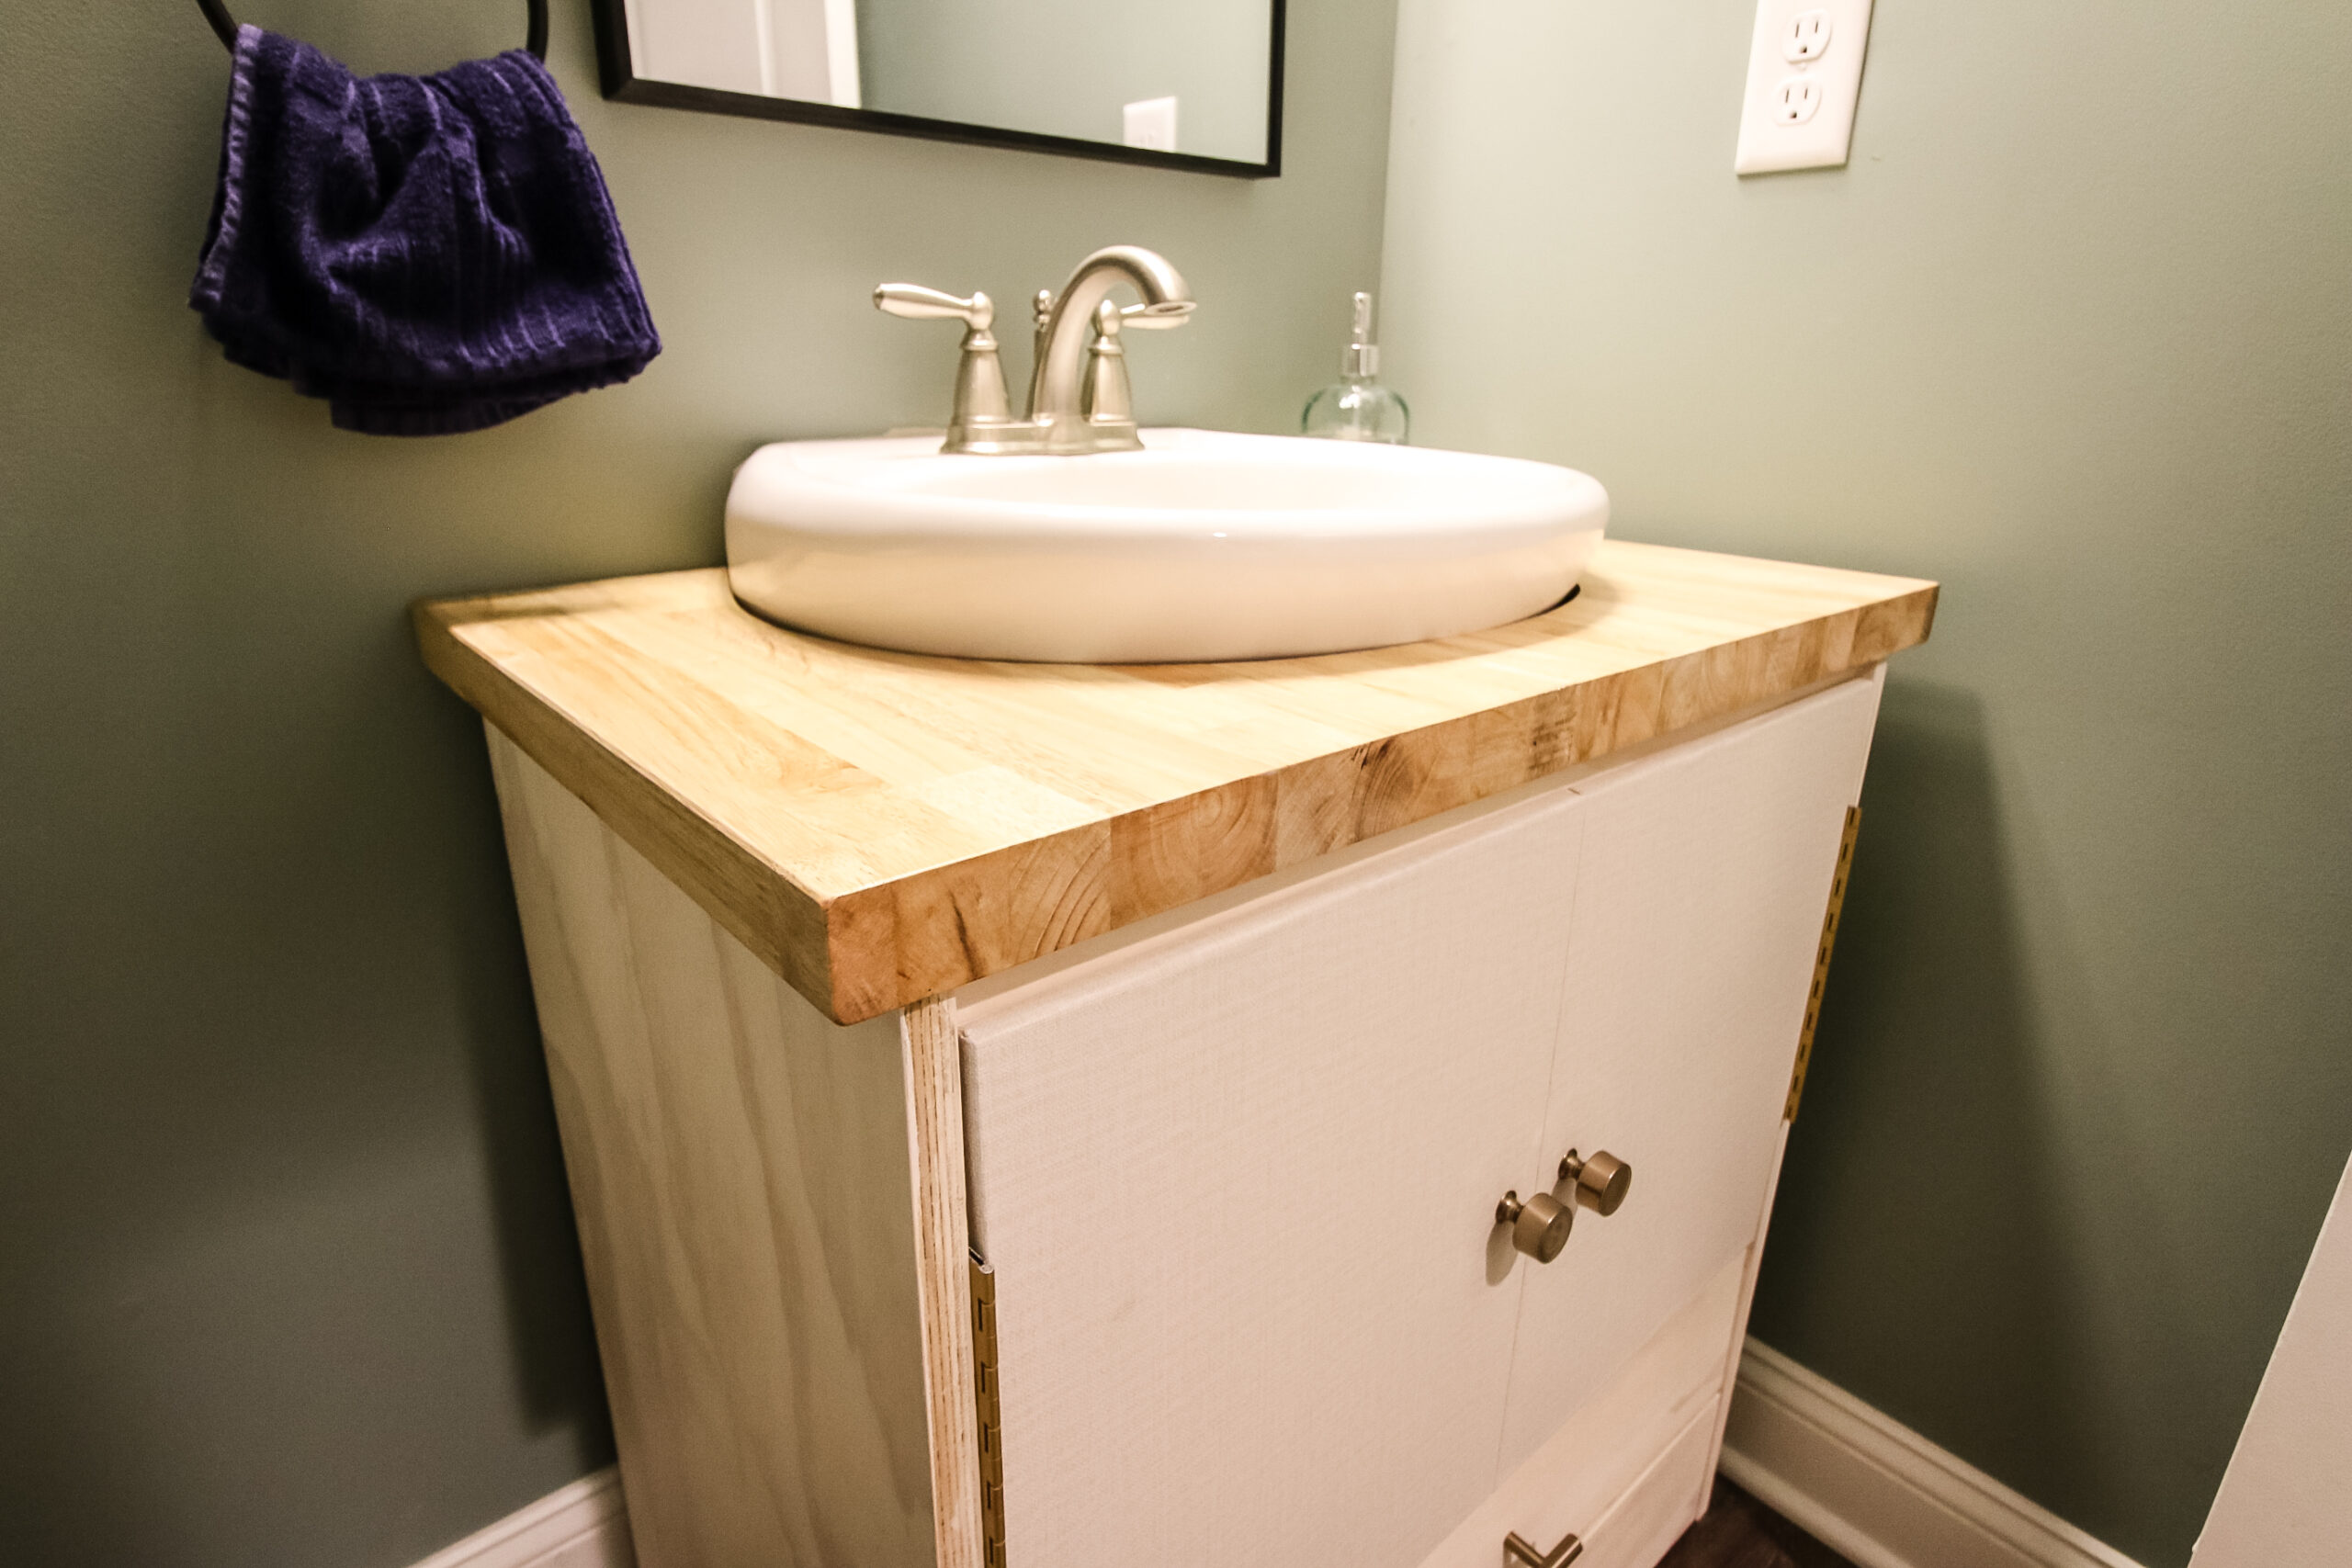 How to build a vanity for a pedestal sink